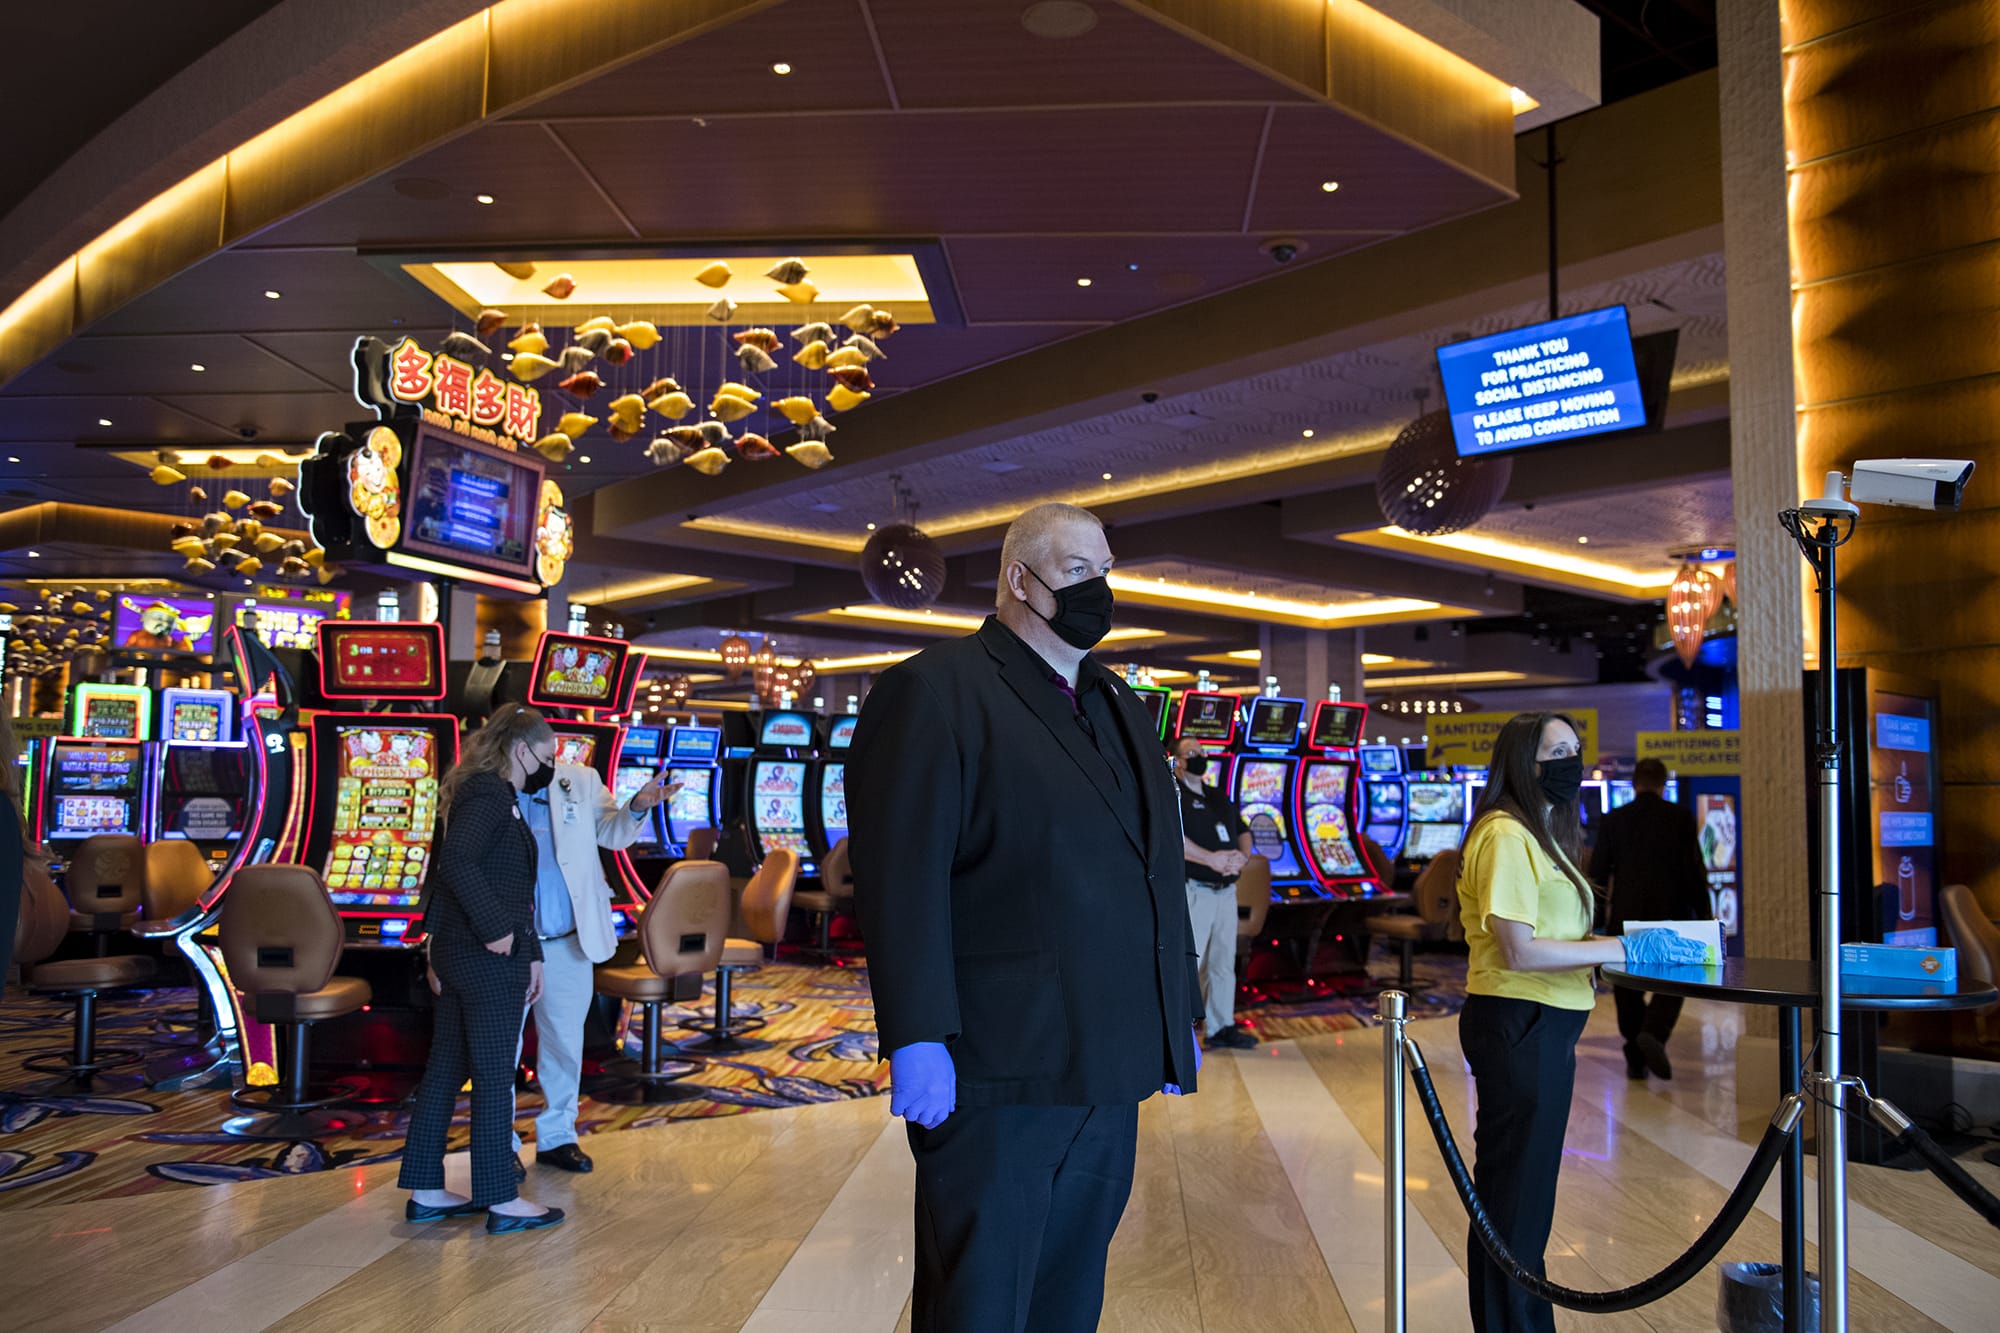 Security officer Stephen Henderson, center, wears a mask and gloves as he keeps an eye on the reopening while a thermometer, right, measures the temperature of guests at ilani Casino Resort on Thursday morning, May 28, 2020.